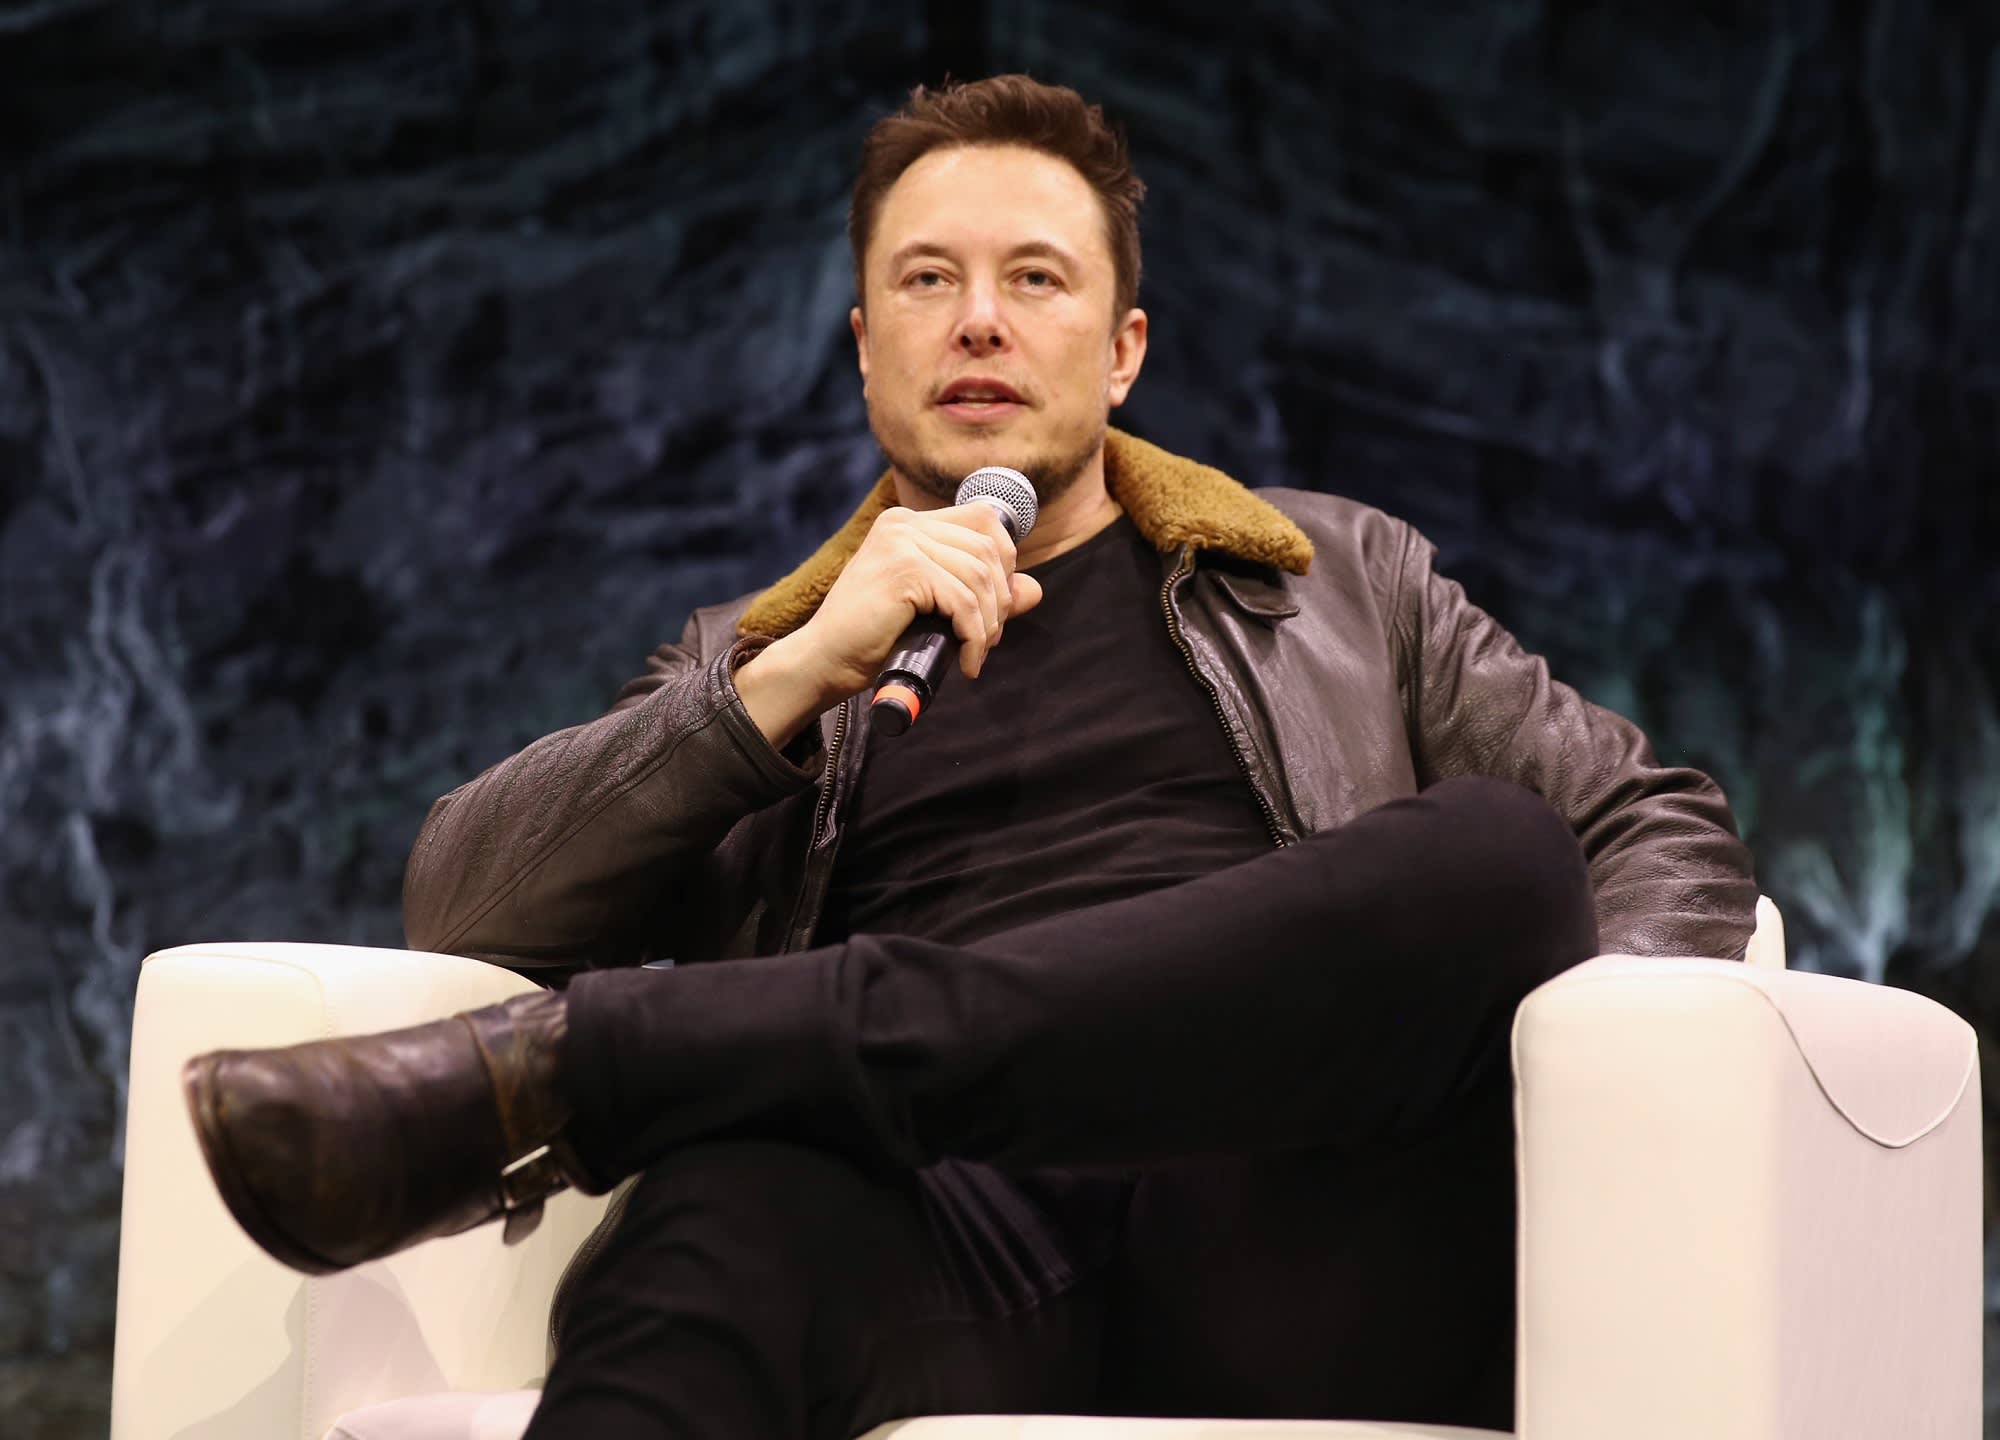 What Makes Elon Musk so Different?